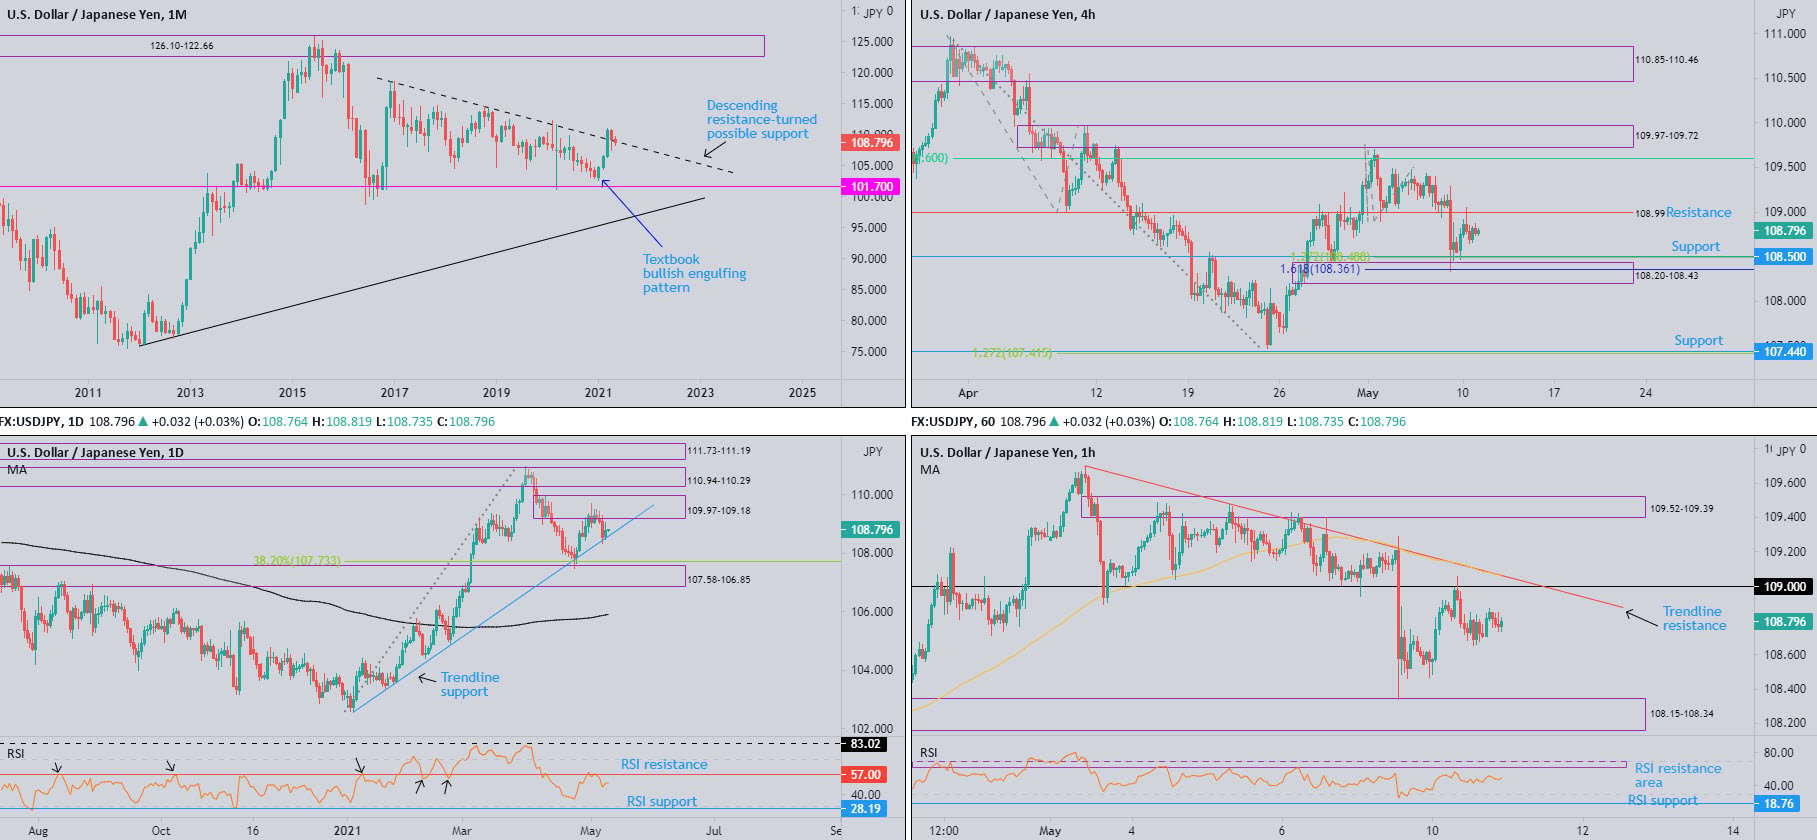 May 11th 2021: USD/JPY 109.00 Resistance in Sight, FP Markets